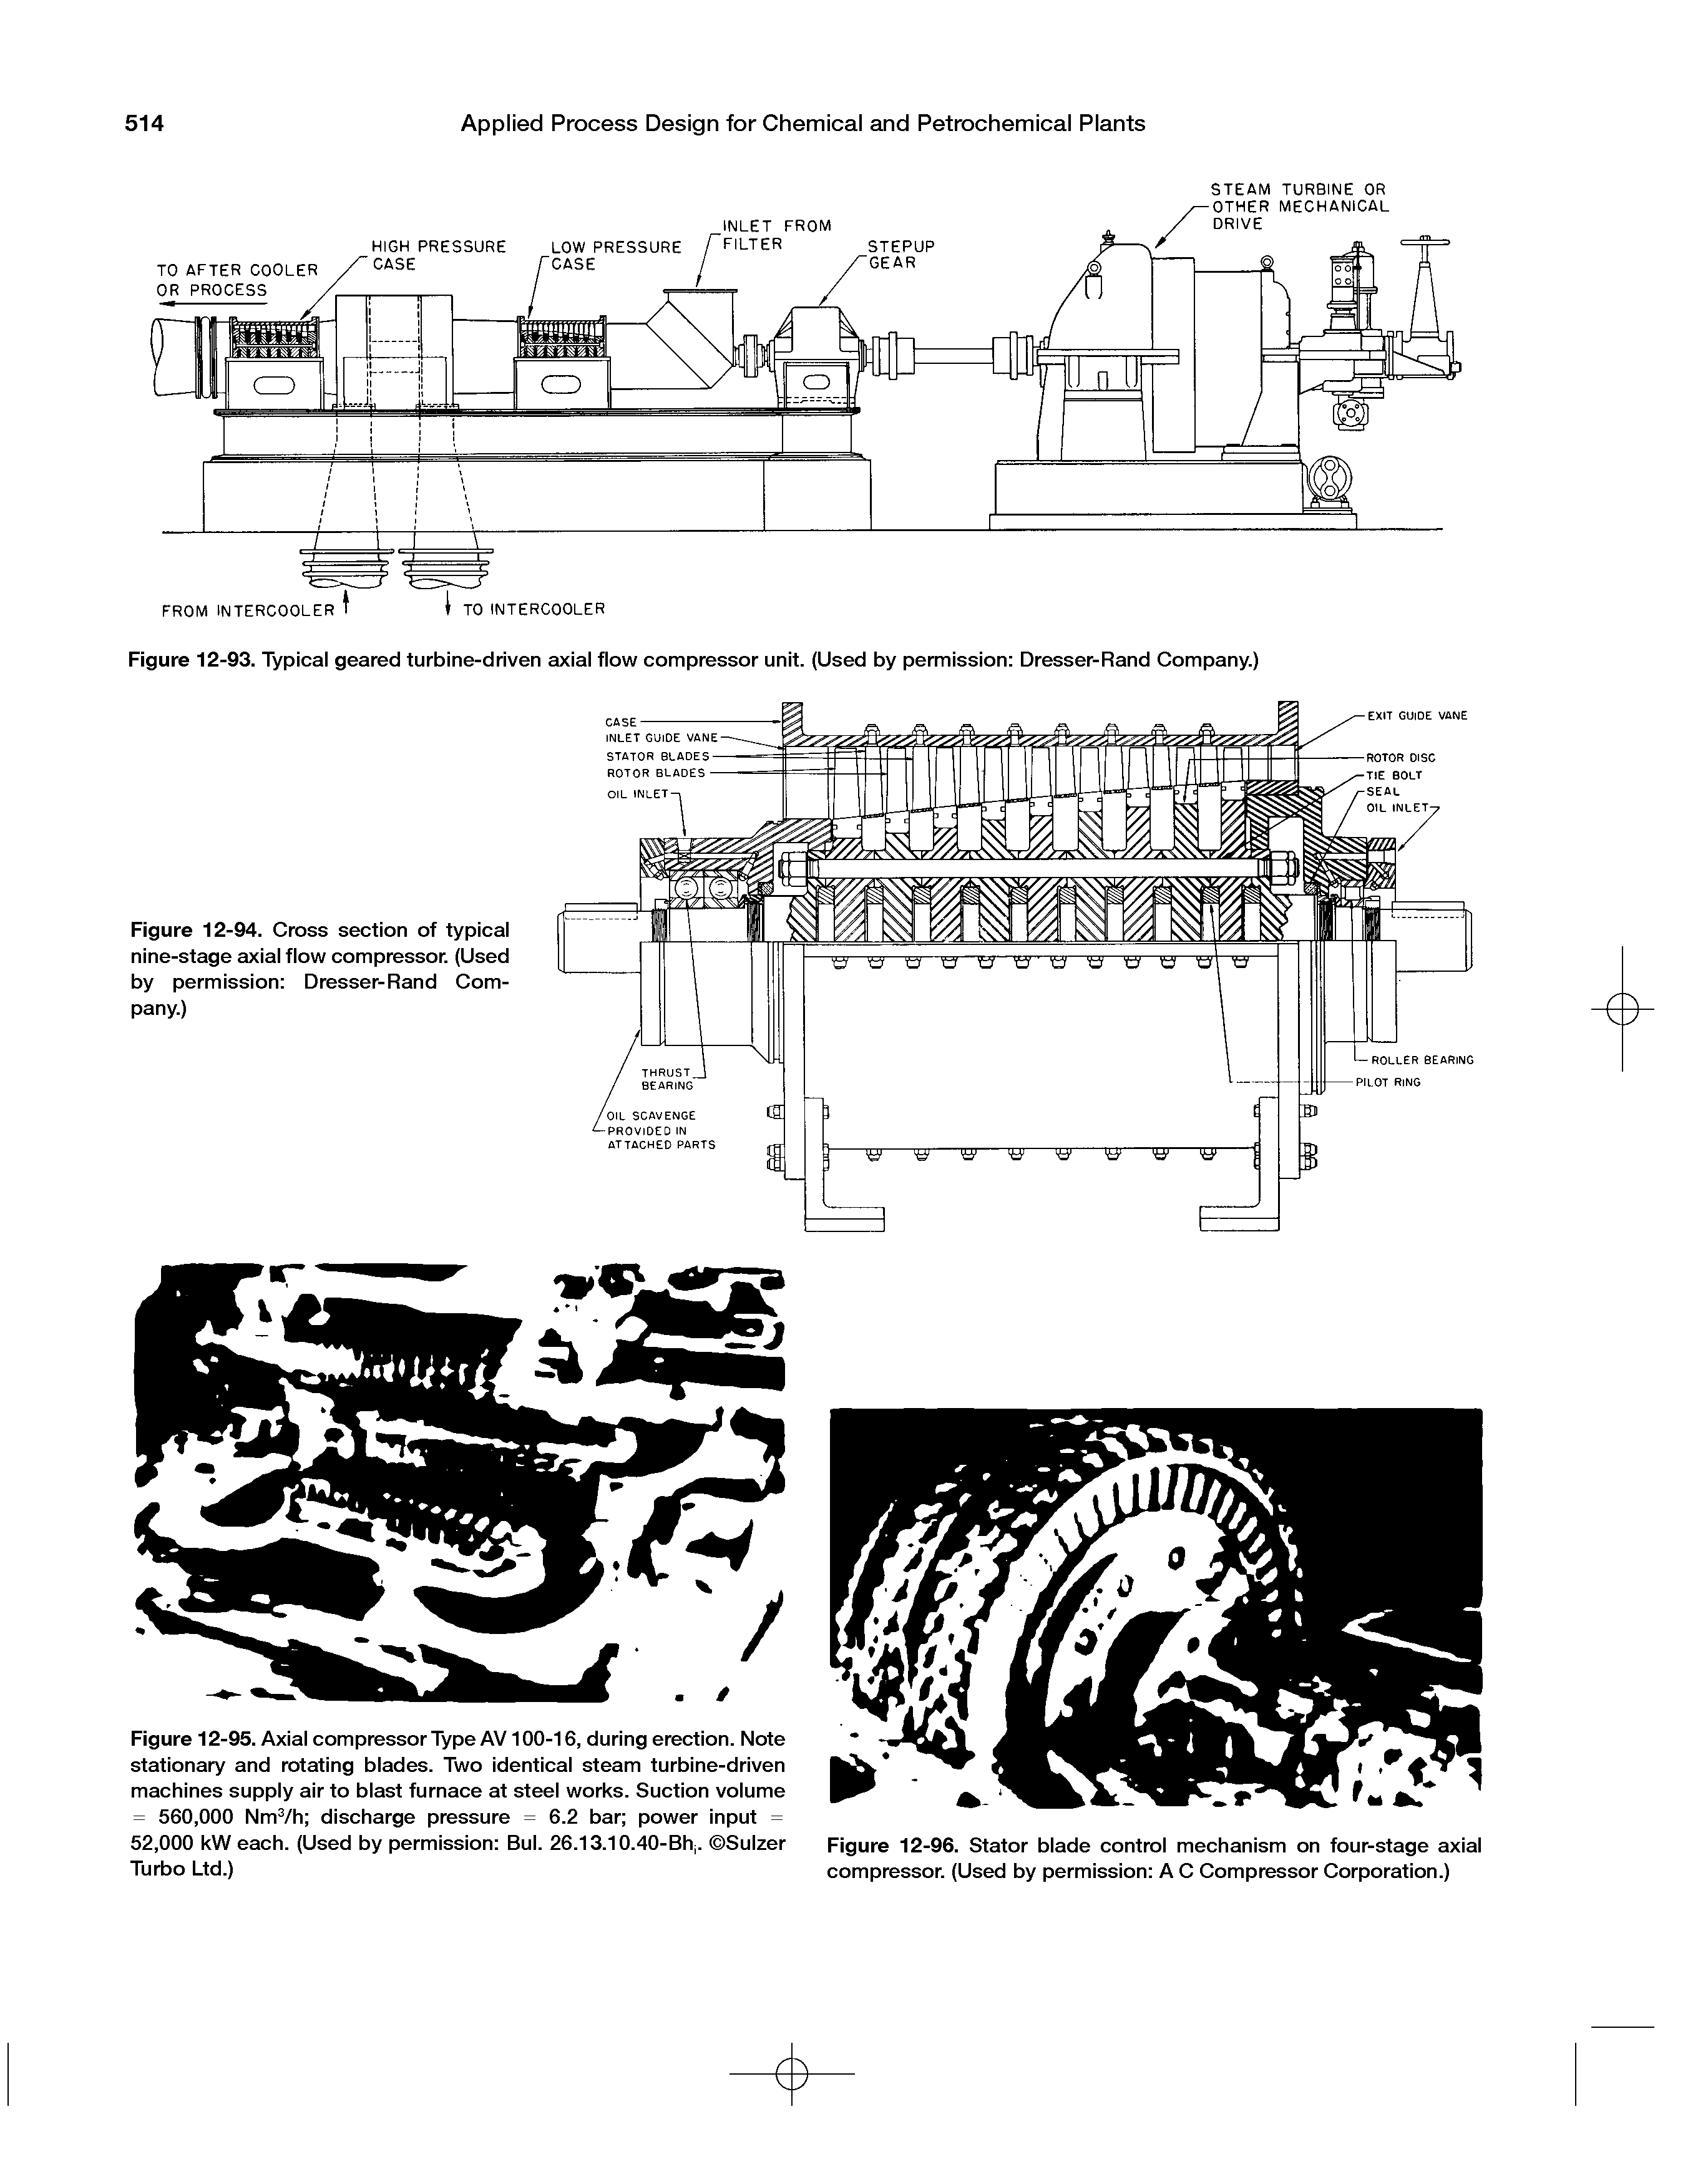 Figure 12-96. Stator blade control mechanism on four-stage axial compressor. (Used by permission A C Compressor Corporation.)...